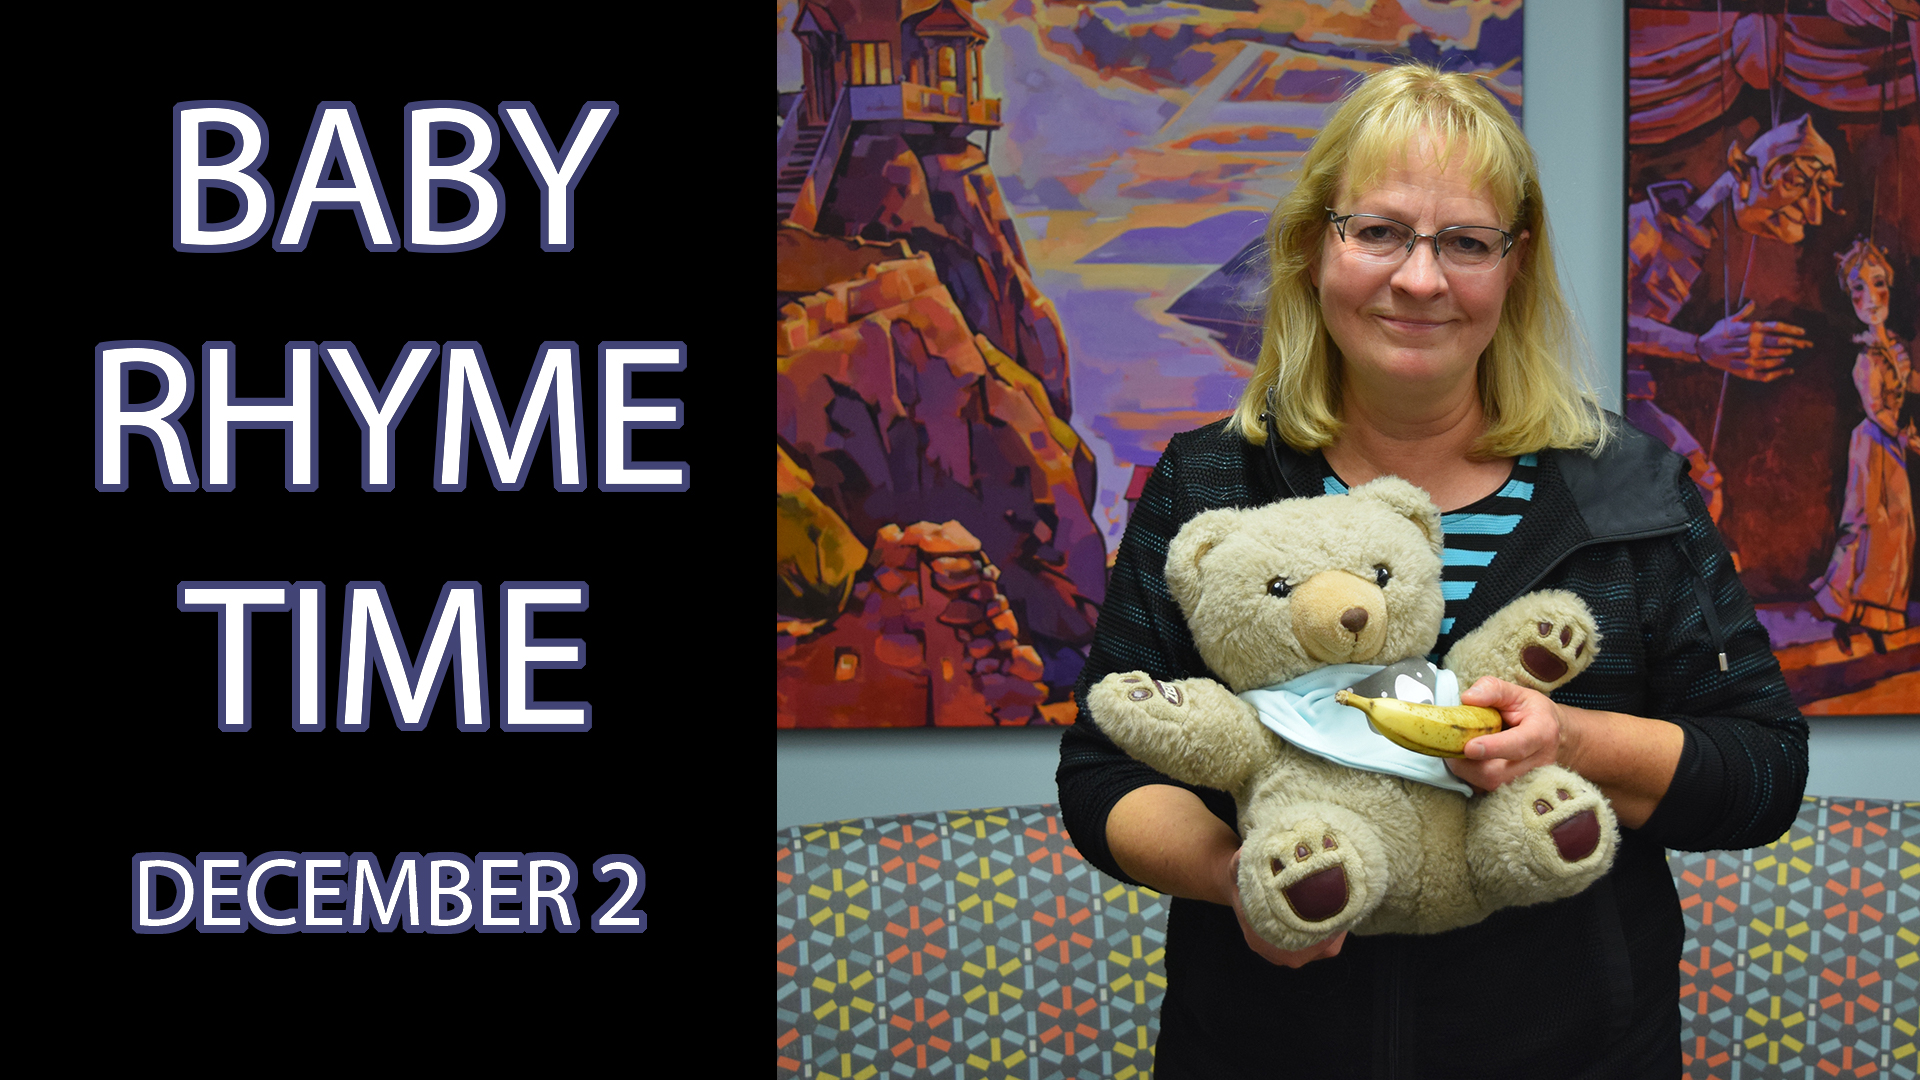 A woman holding a stuffed bear next to the text "Baby Rhyme Time December 2"